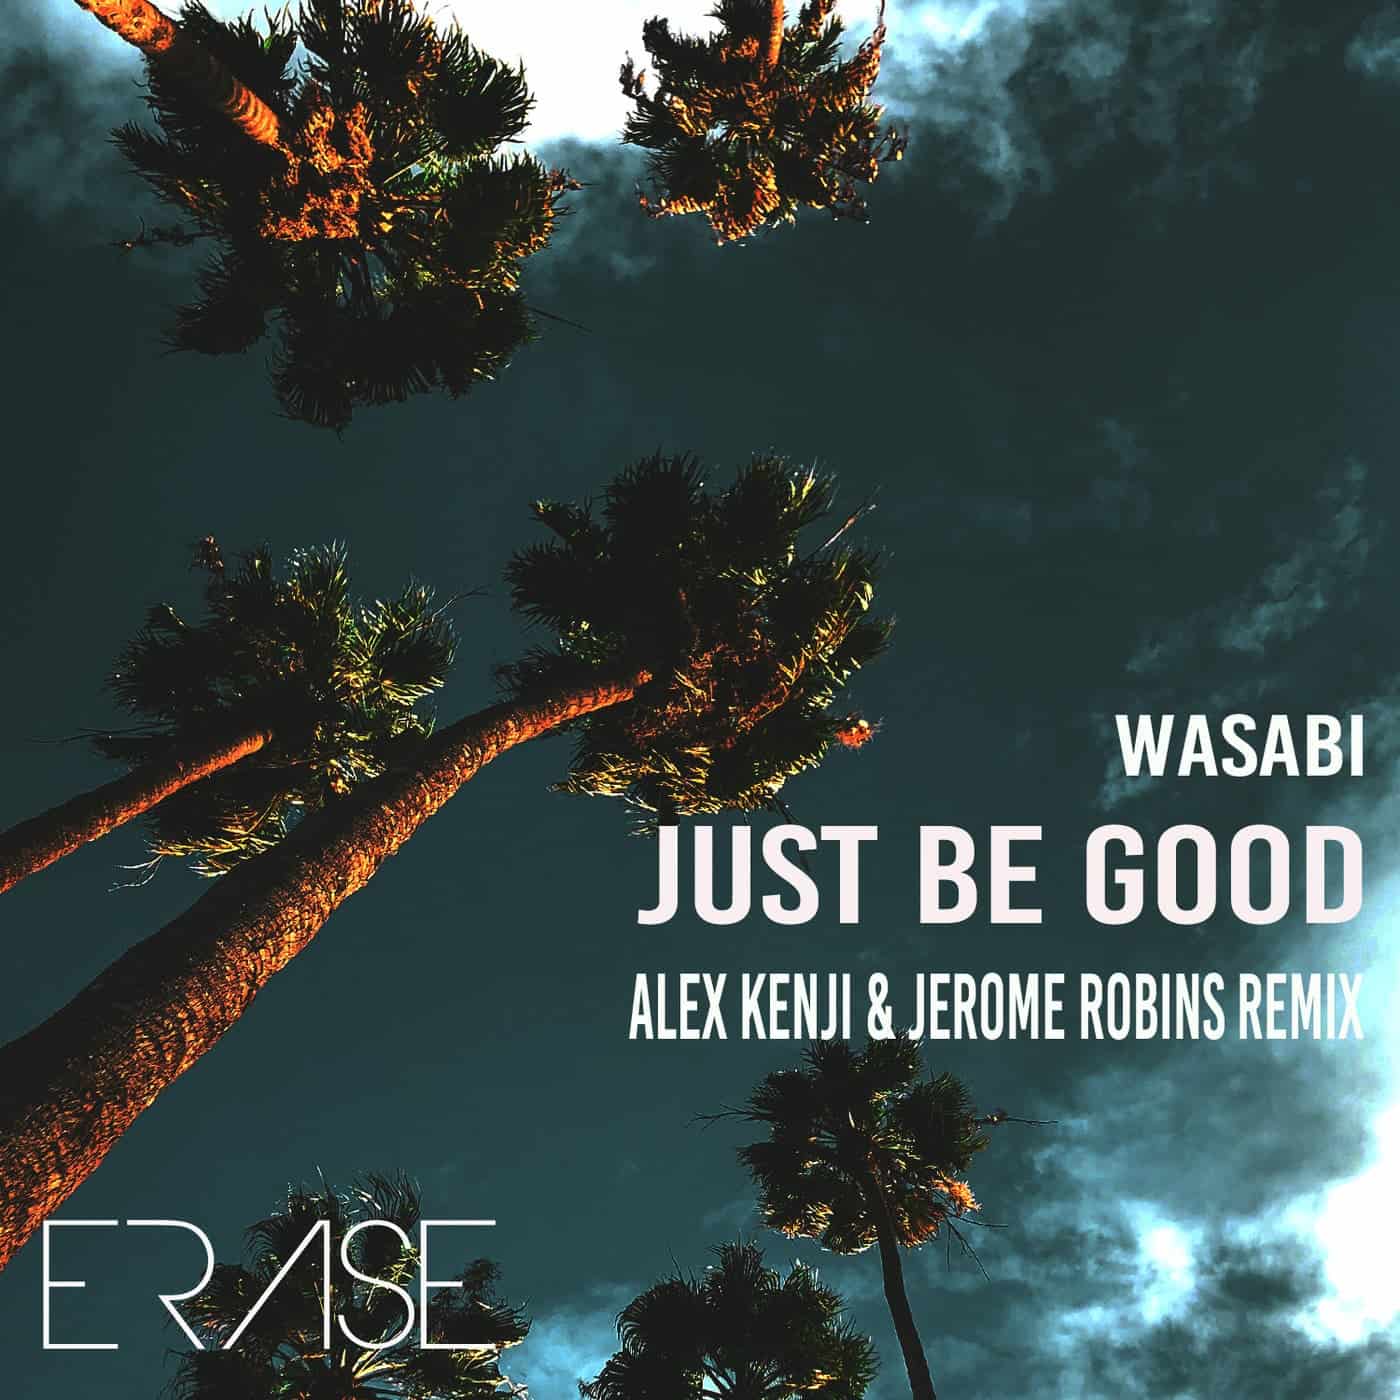 image cover: Just Be Good ( Alex Kenji & Jerome Robins Remix ) by Wasabi on Erase Records